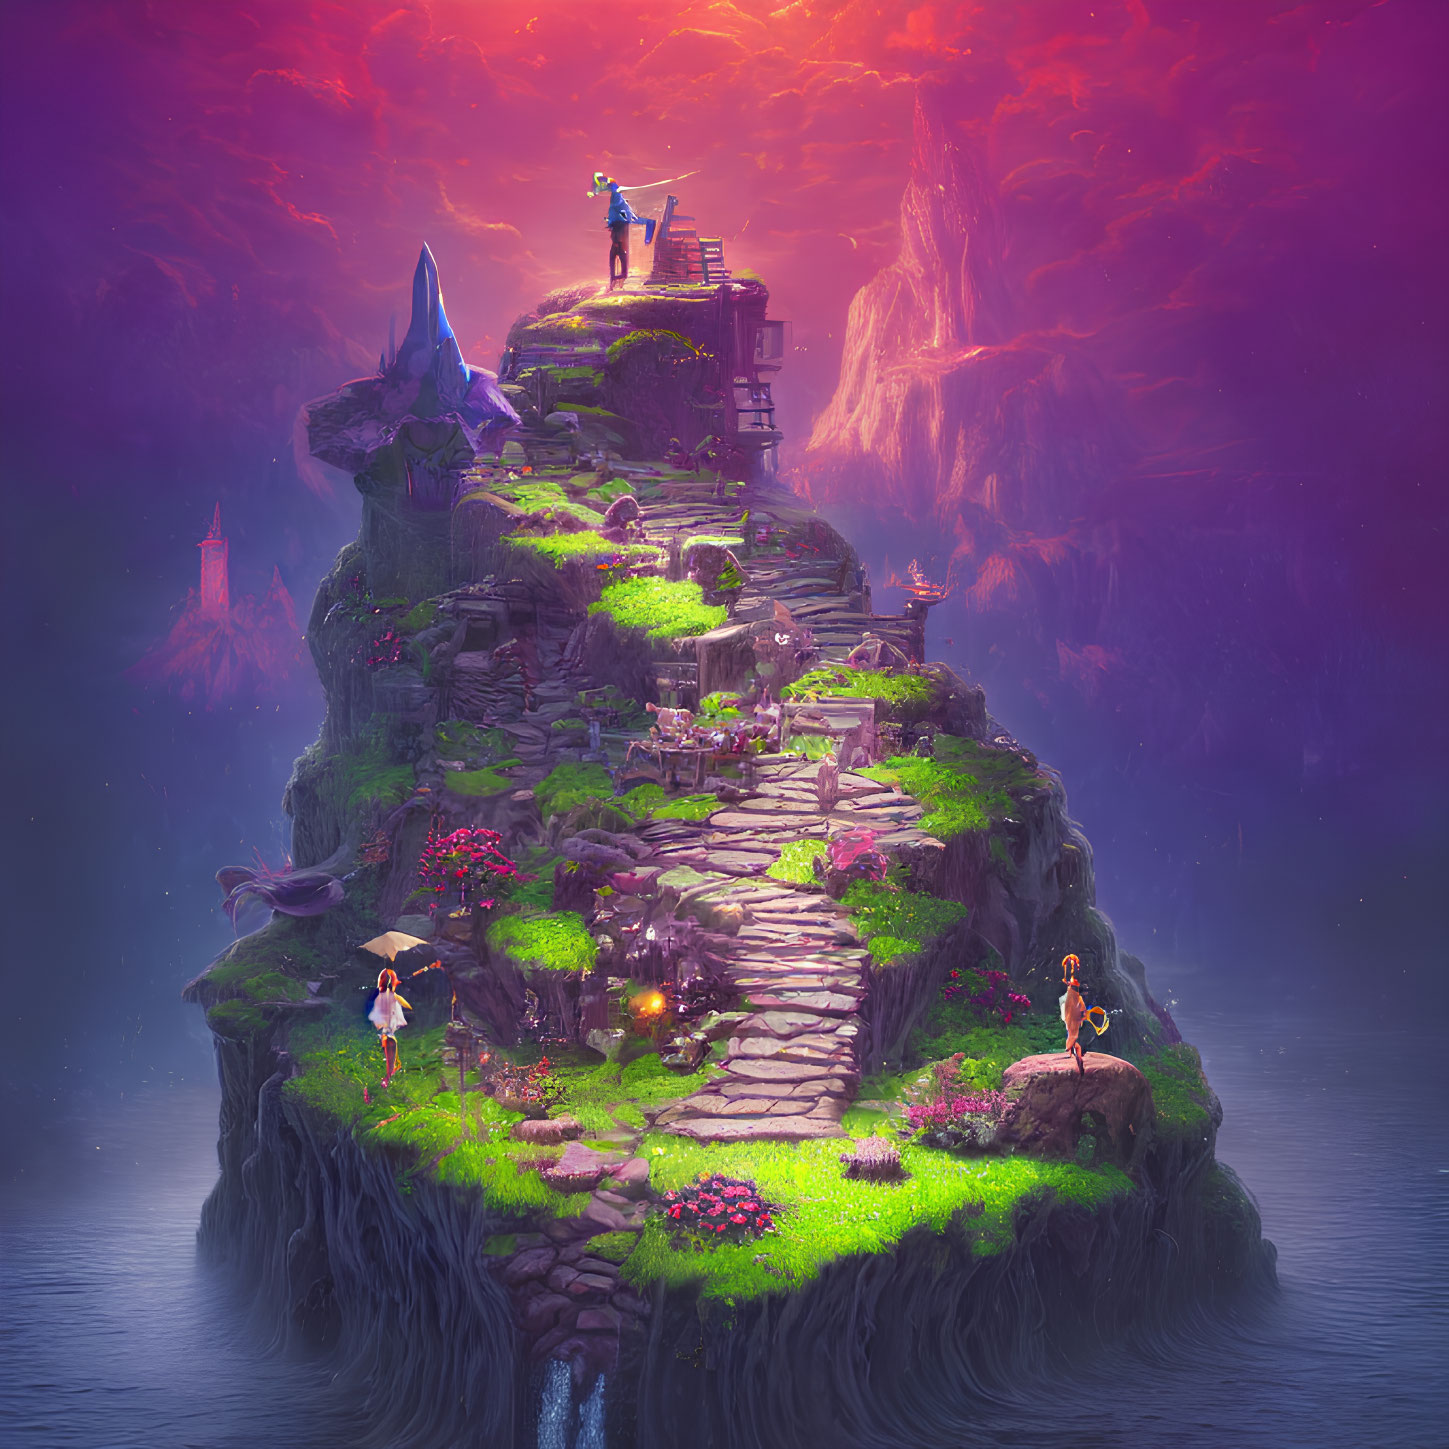 Fantasy landscape with floating island, observatory, medieval characters, colorful flora